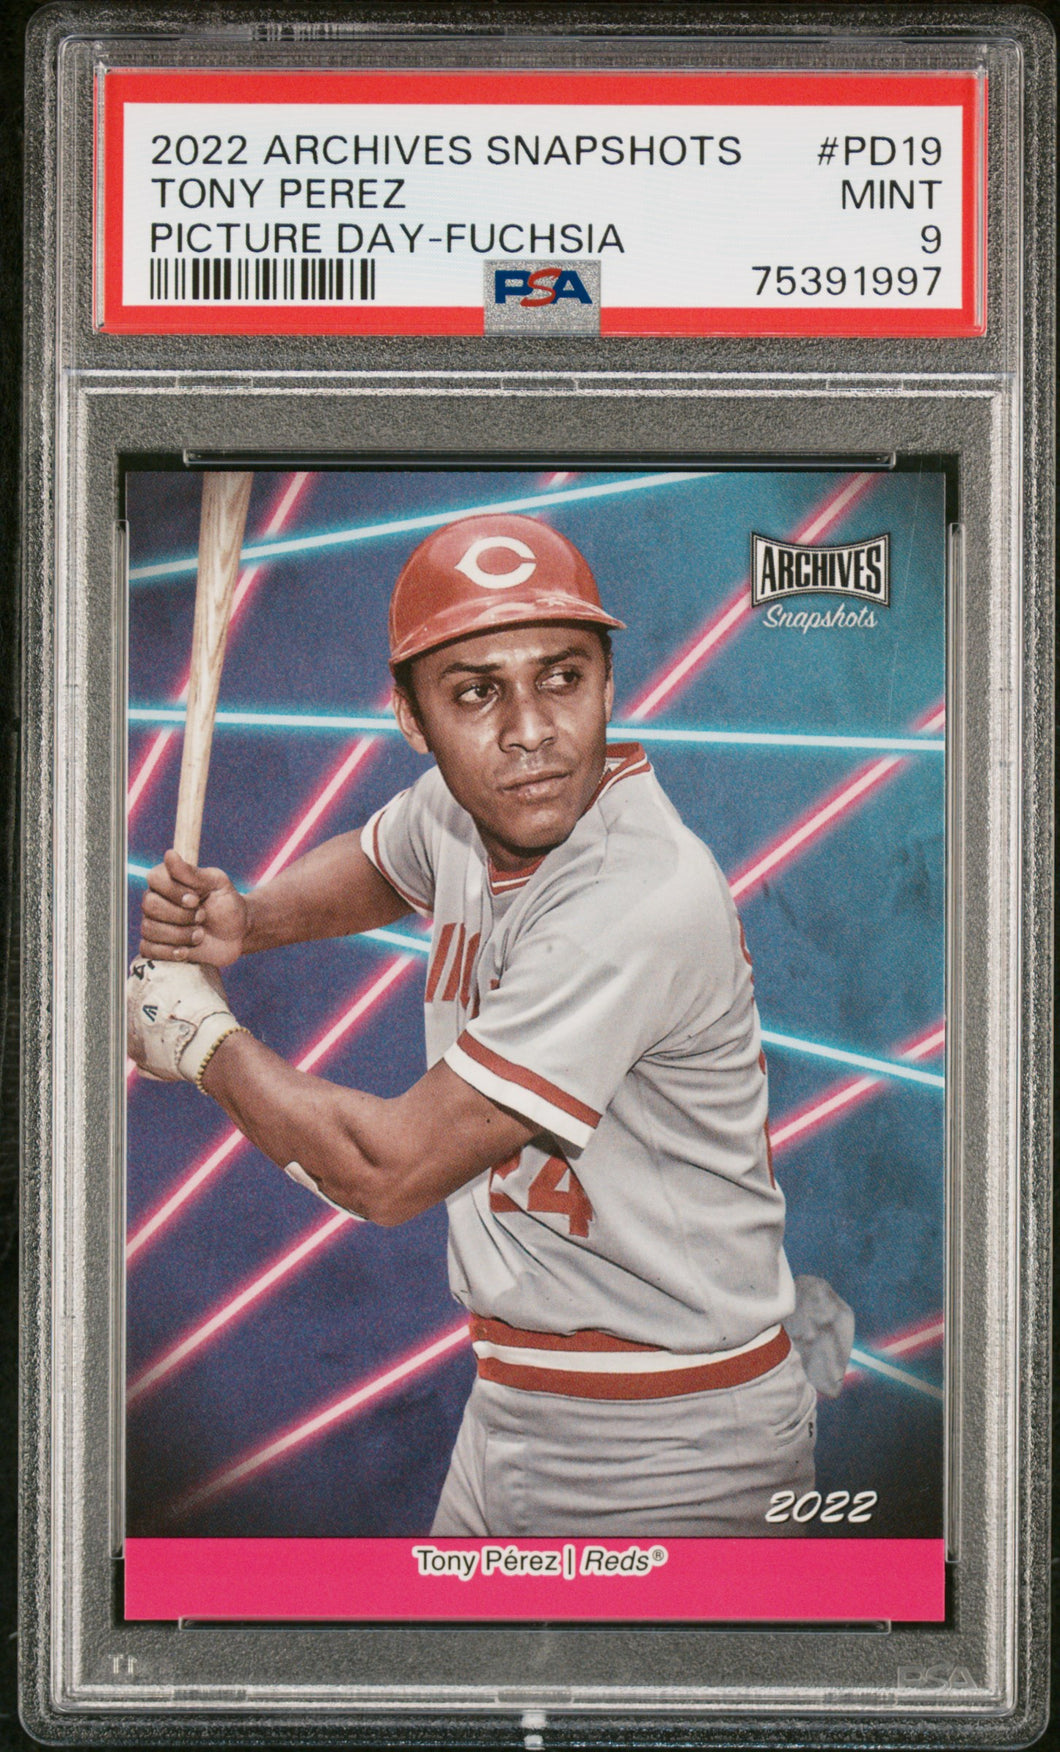 2022 Topps Archives Snapshots Picture Day #/50 Tony Perez Pink SP Reds PD-19 PSA 9 POP 1